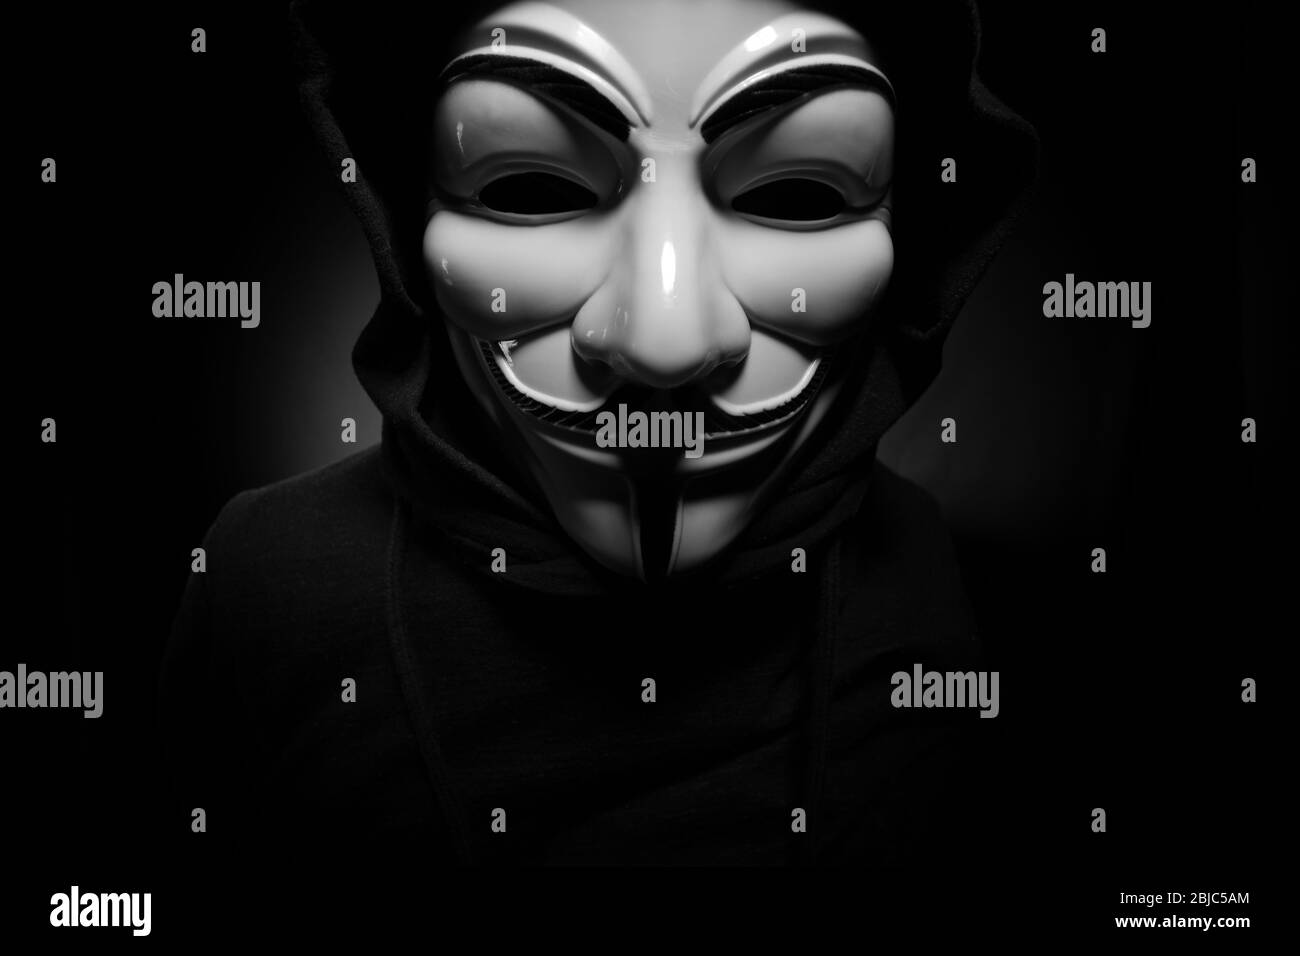 Anonymous guy fawkes mask icon confidentiality Vector Image